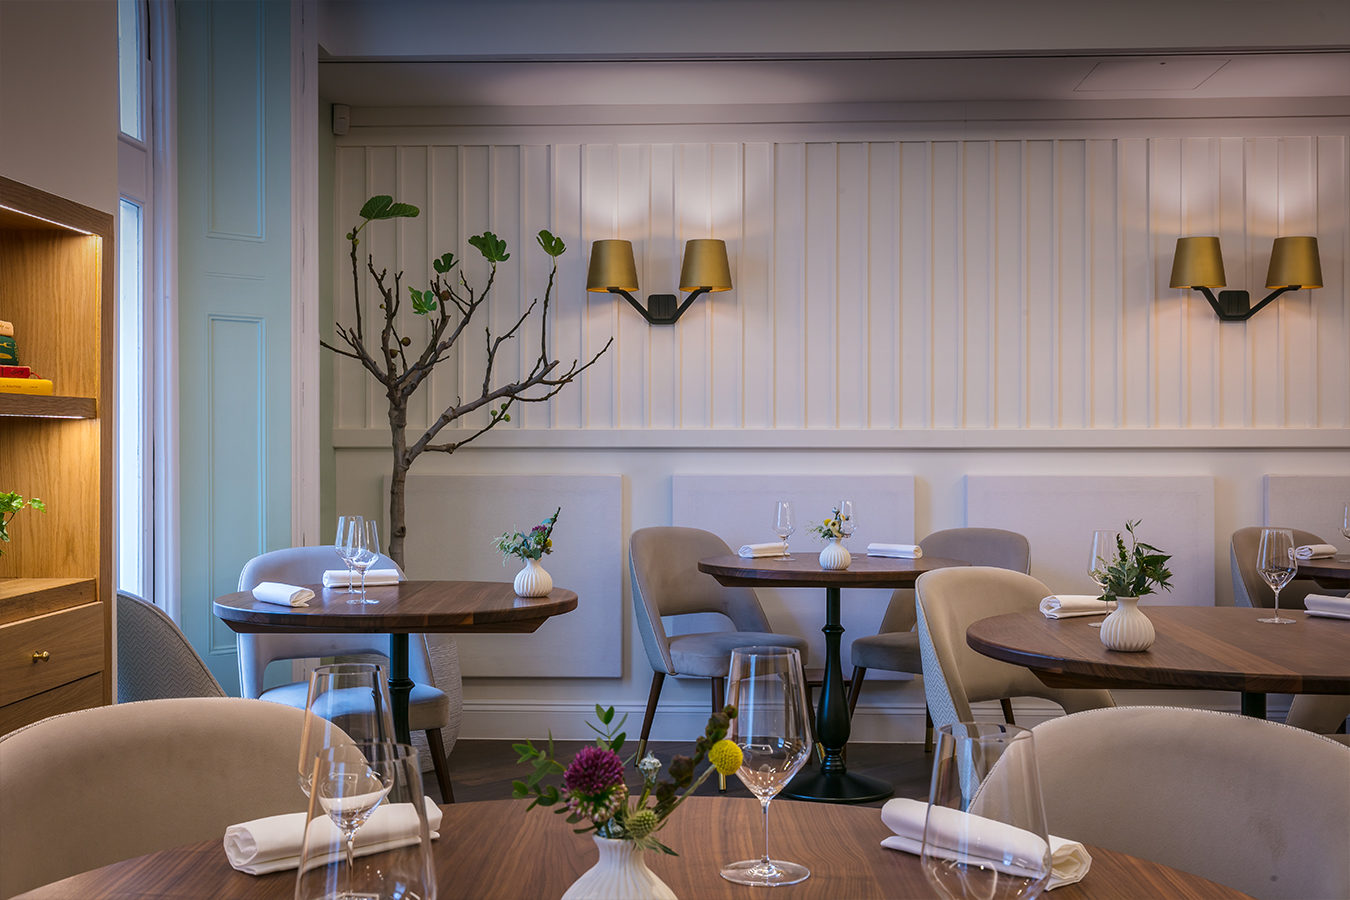 Core by Clare Smyth Restaurant Review: Michelin Starred Perfection in Notting Hill | The Foodaholic